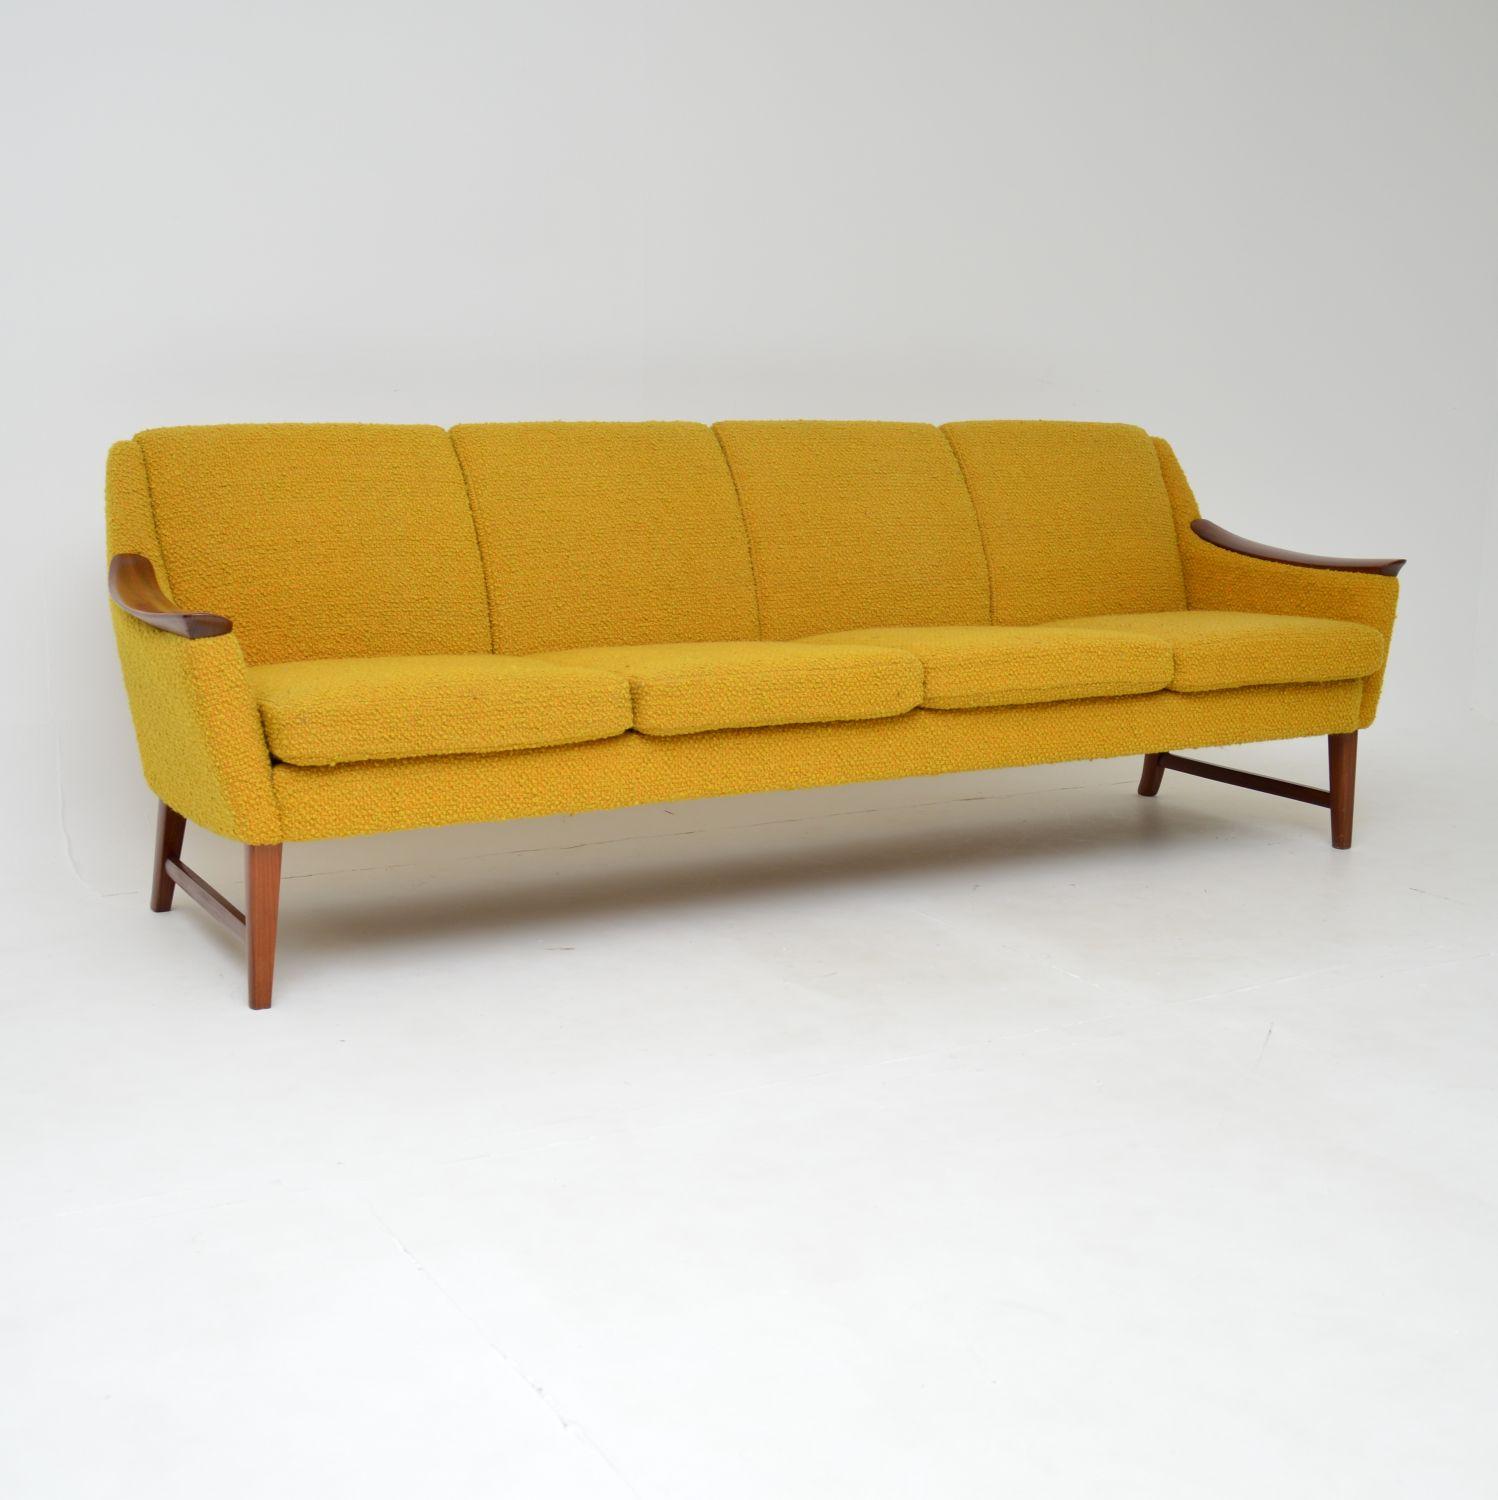 A stunning and very comfortable vintage four seat sofa with a solid teak frame and original yellow boucle wool upholstery. This was made in Norway, it dates from around the 1960-70’s.

This is in spectacular original condition, the yellow boucle is